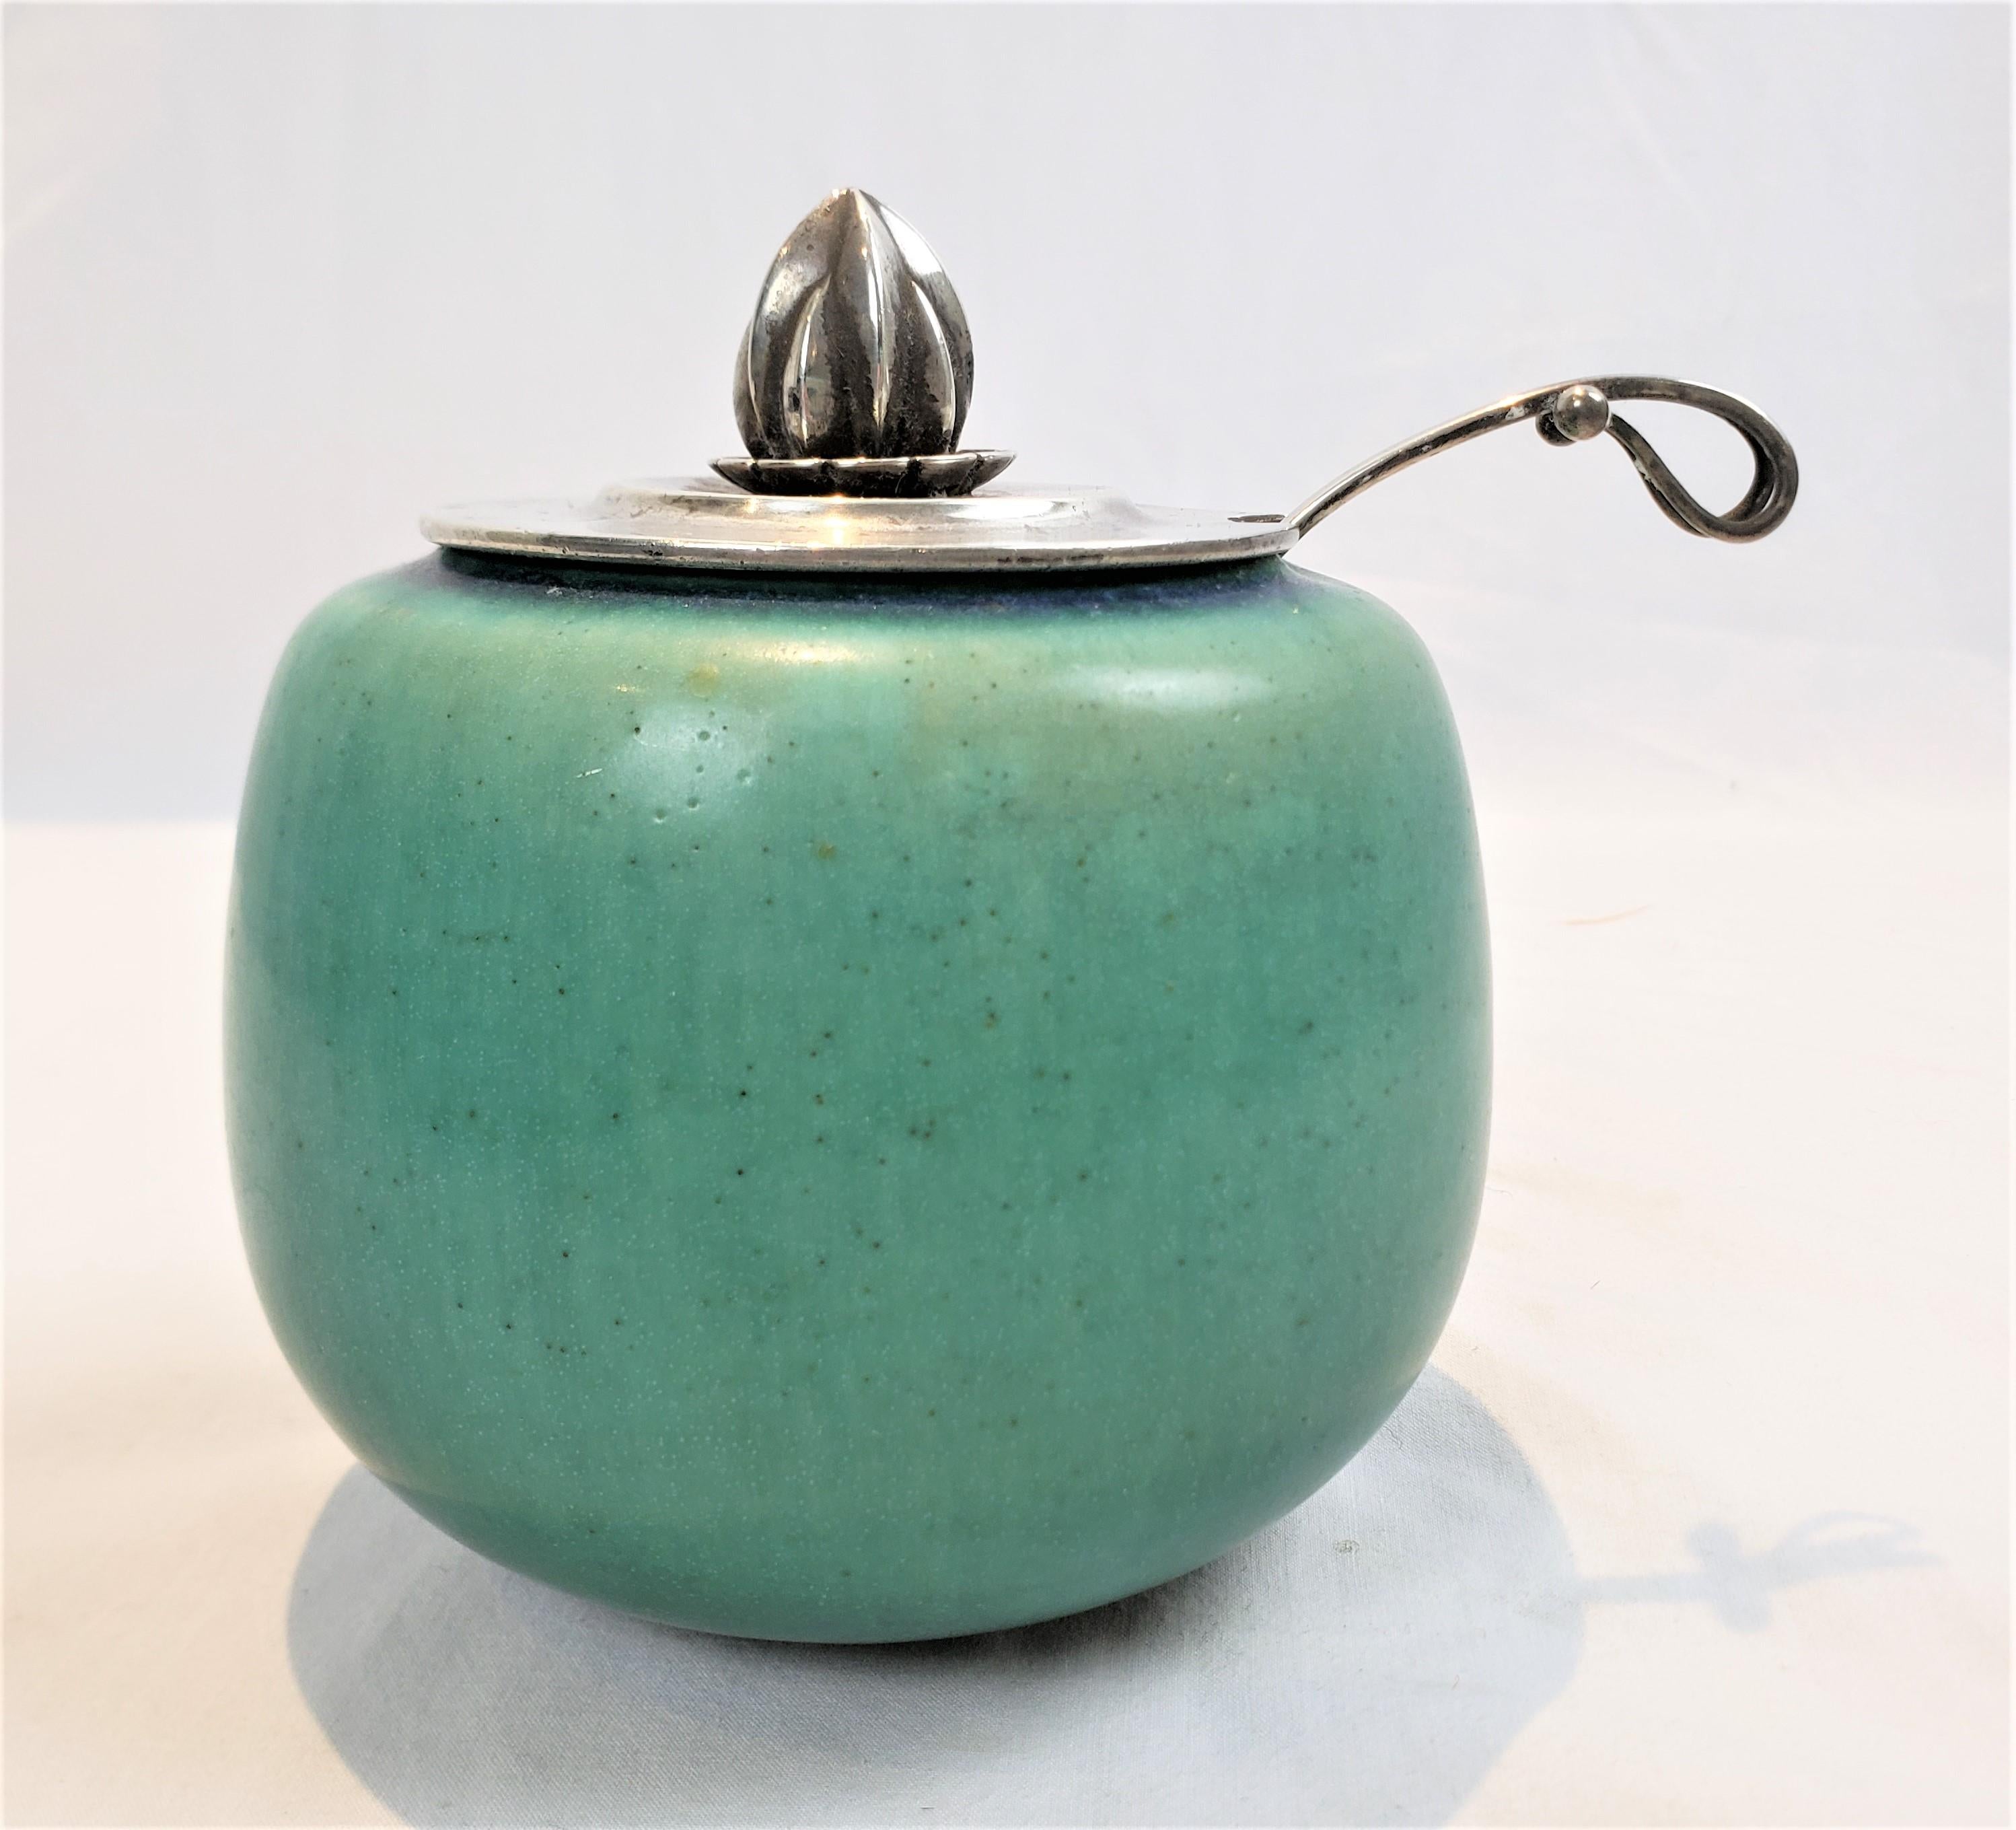 This jam jar or pot was made by the iconic Georg Jensen of Denmark in approximately 1920 in the period Art Deco style. The jam pot itself was done by Saxbo pottery factory of Denmark with a turquoise glaze with a matte finish. The lid was designed